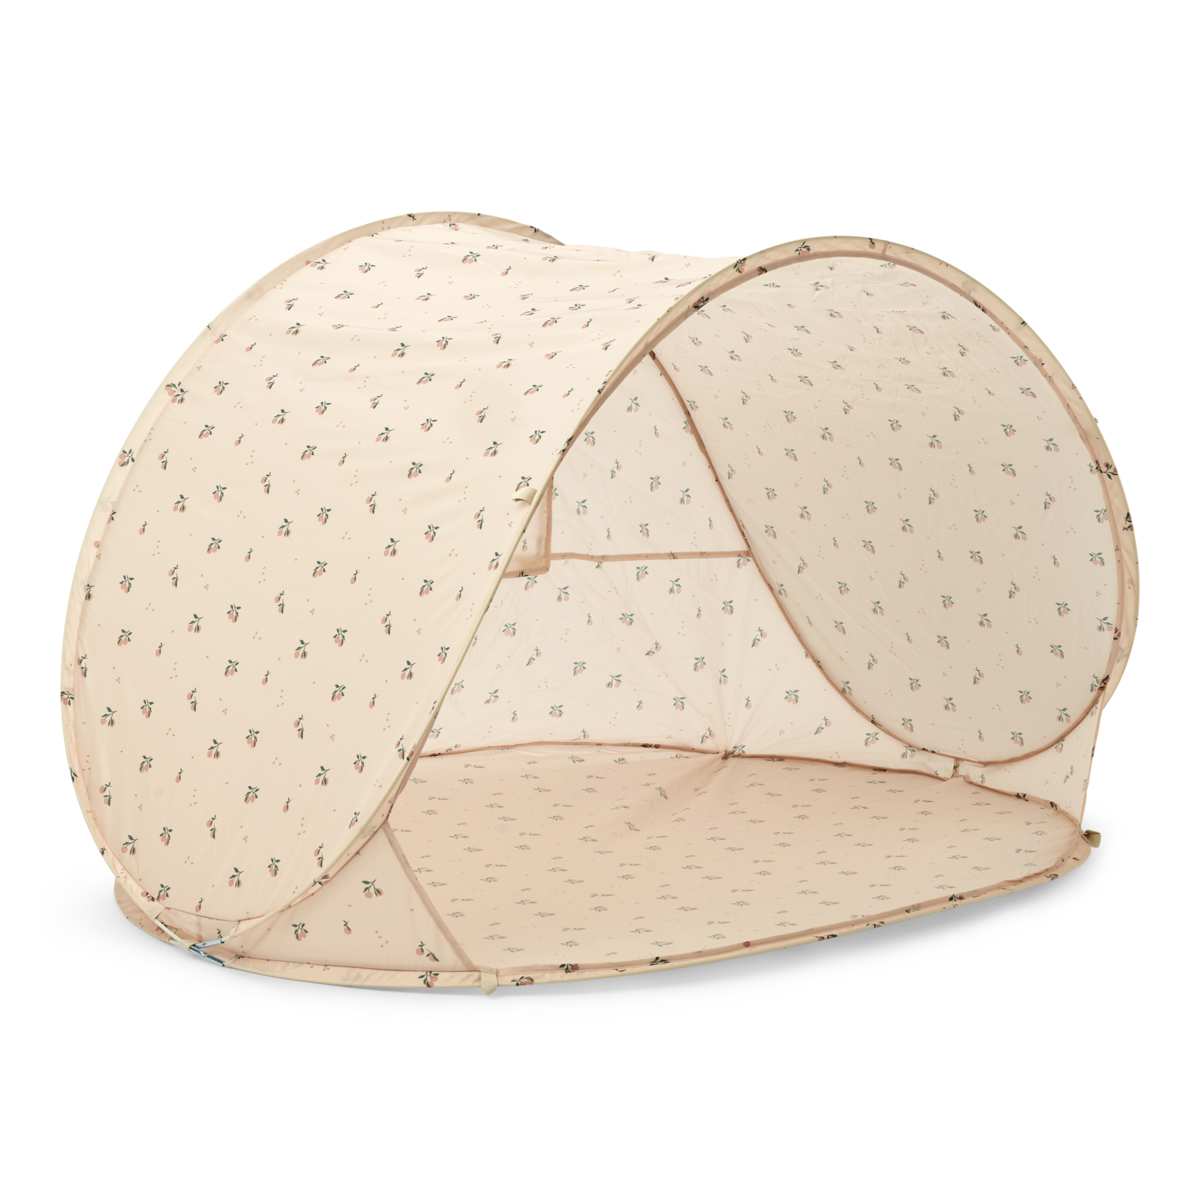 Liewood Liewood Cassie Pop Up Tent - Peach / Sea shell - Decomusy